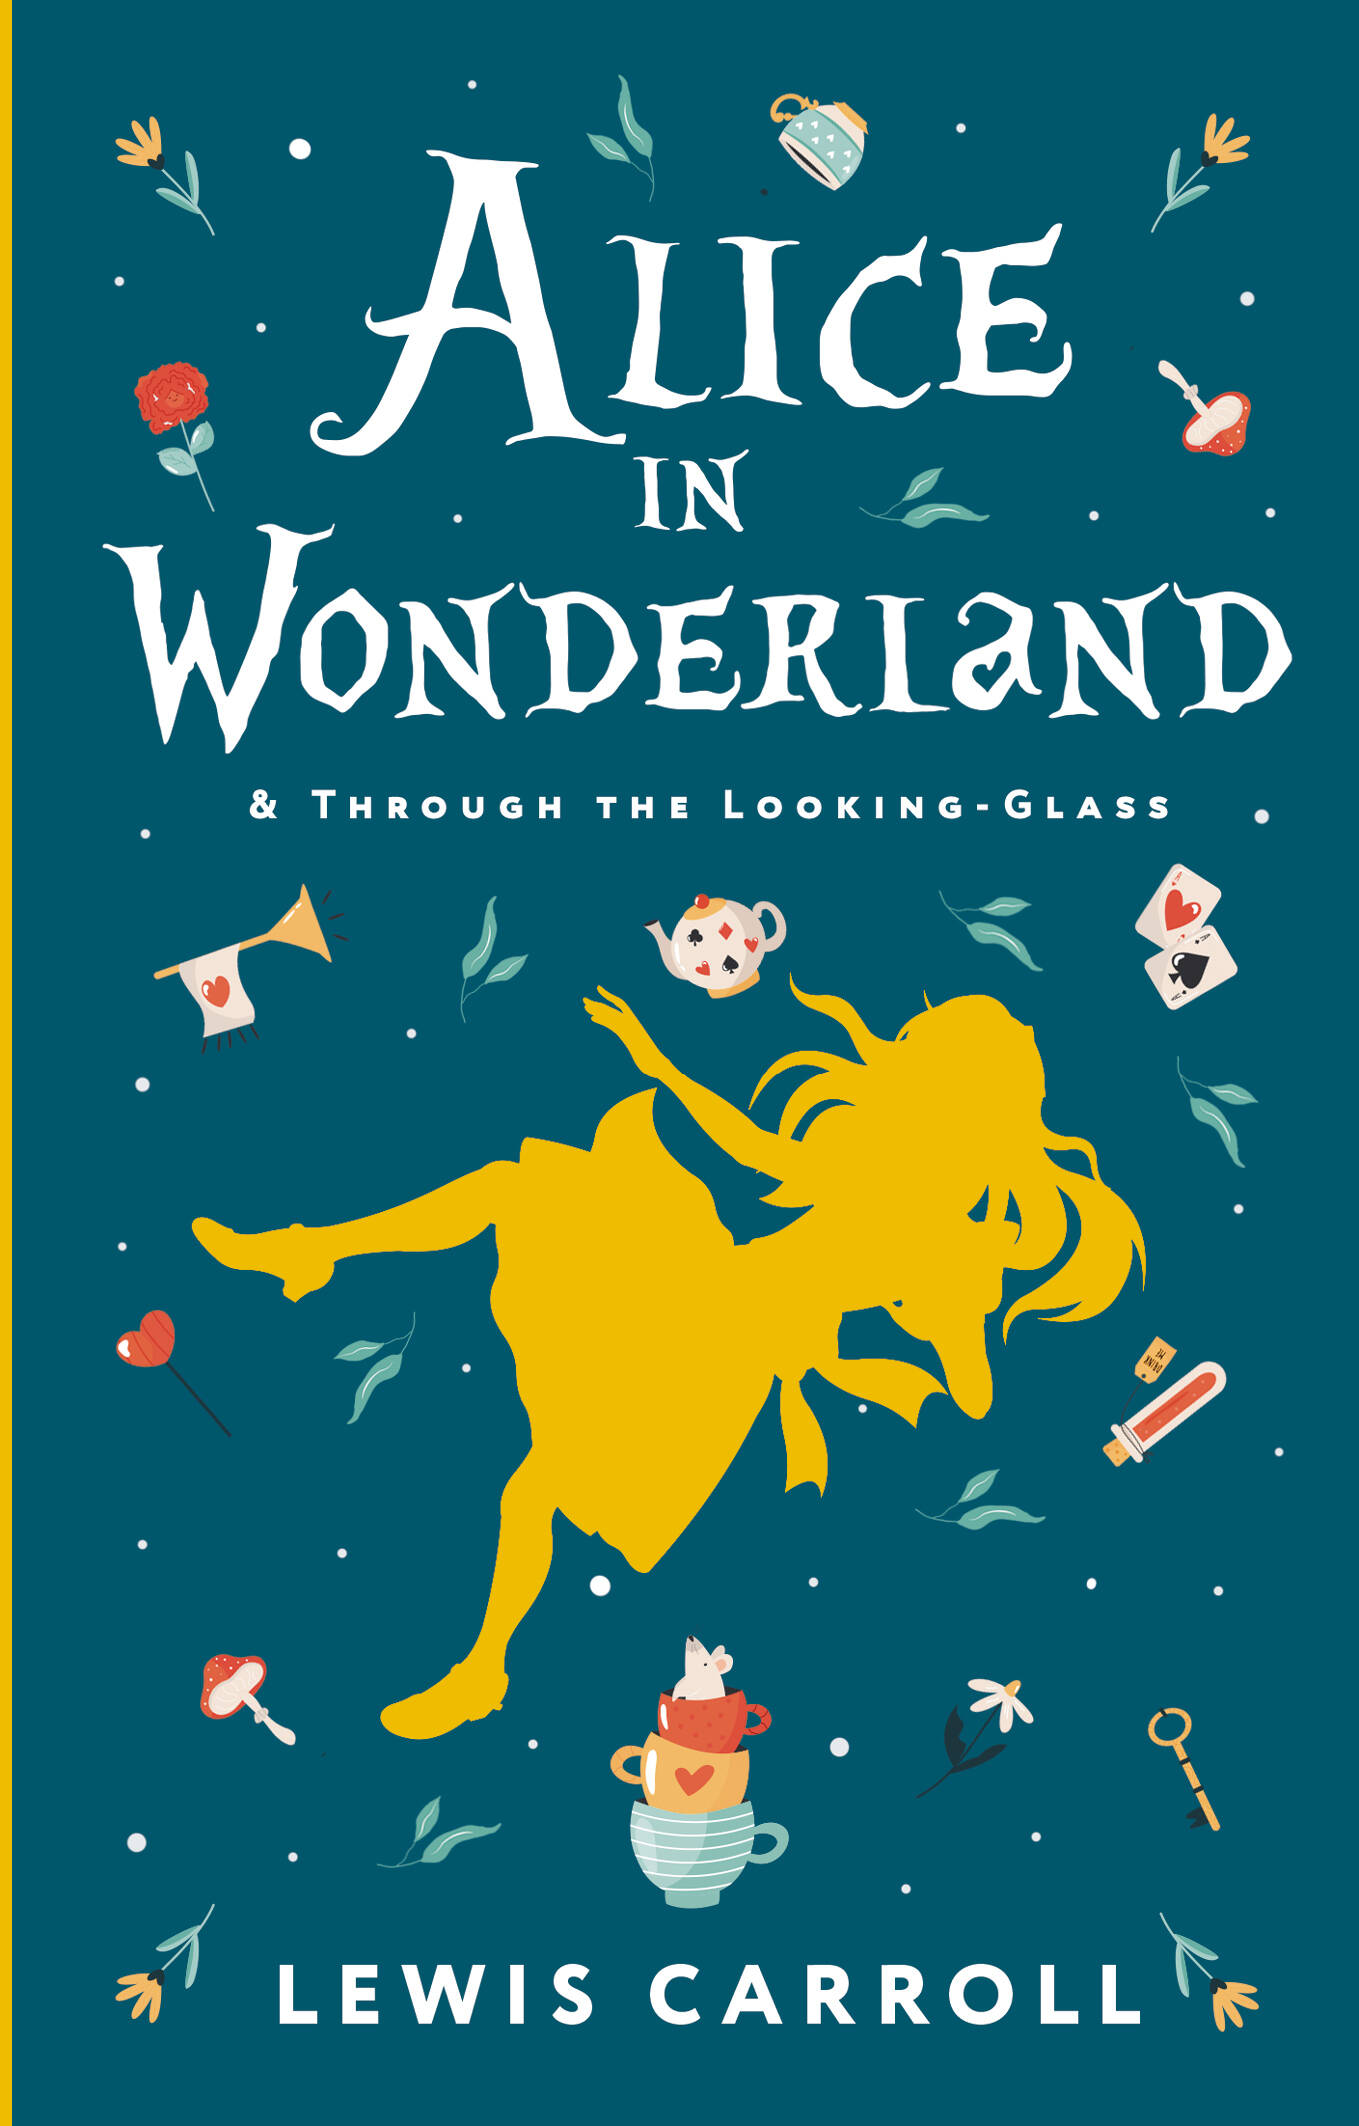 Carroll Lewis Alices Adventures in Wonderland. Through the Looking-Glass